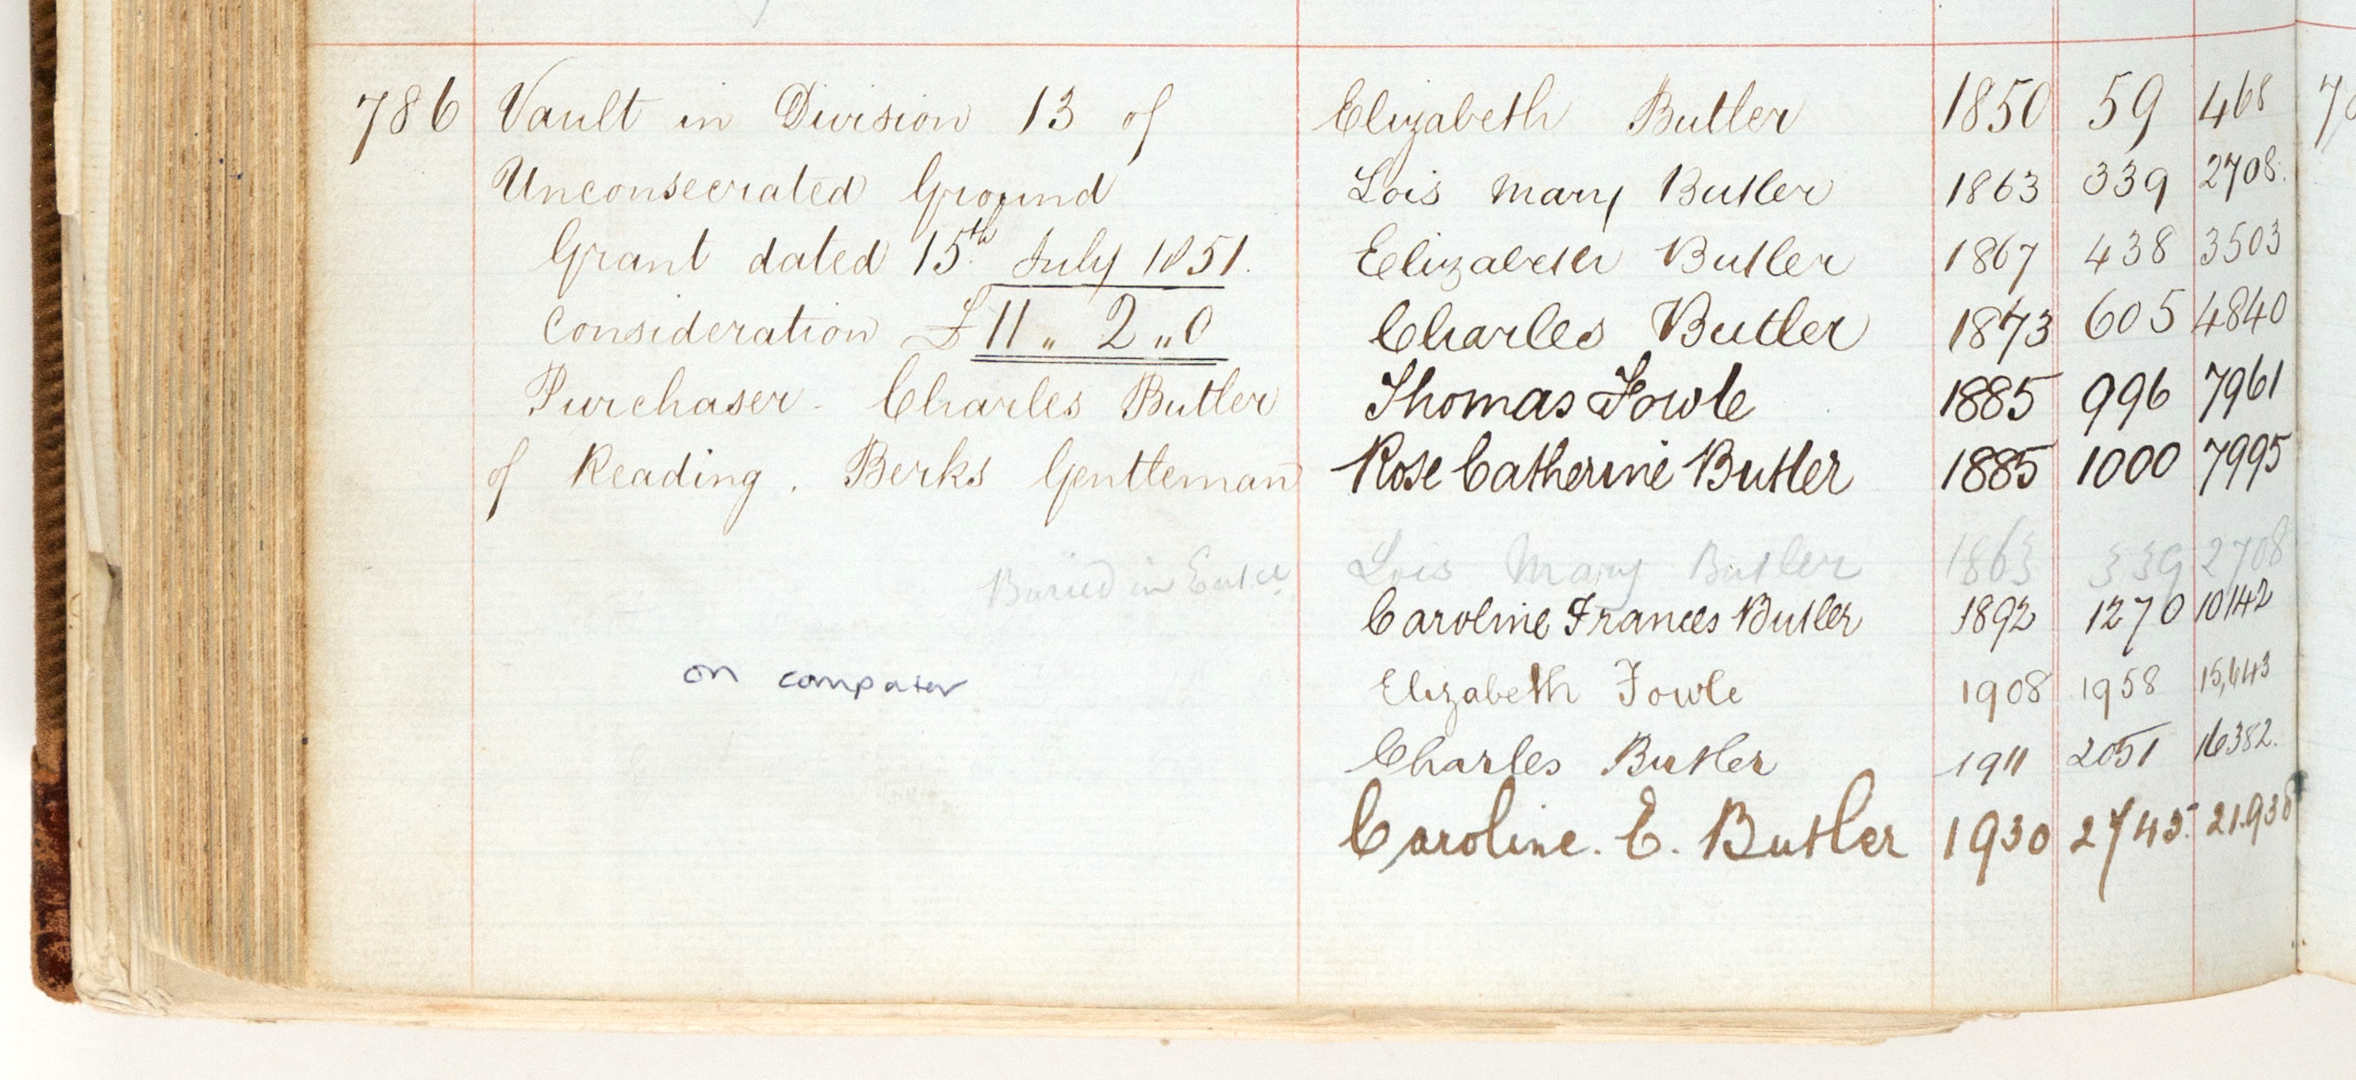 Photograph of entry 786 in Register of Graves.